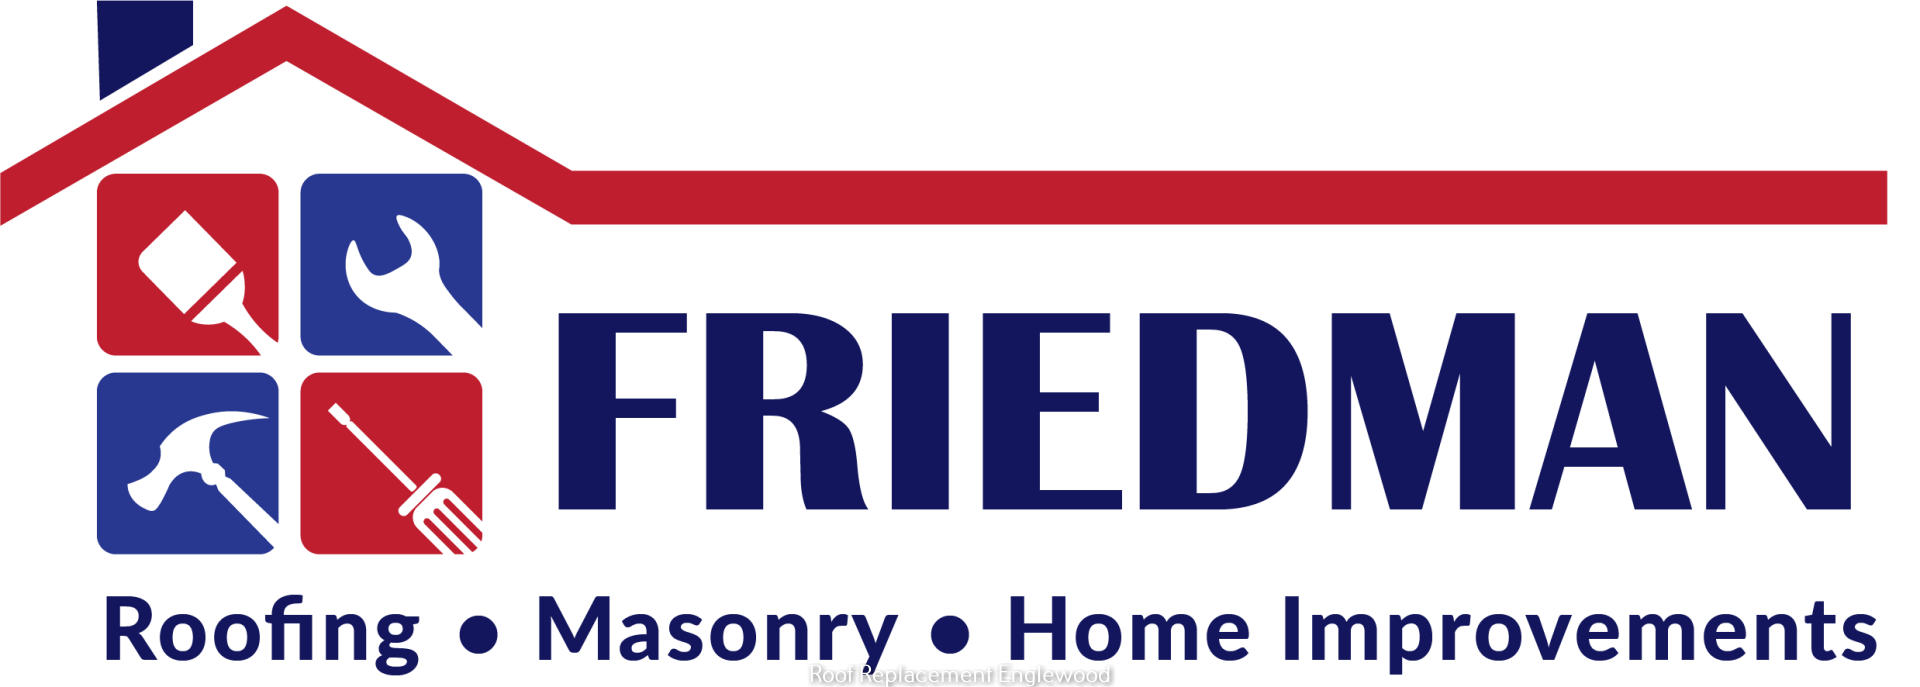 Friedman Home Improvements and Masonry Talks About Their Services